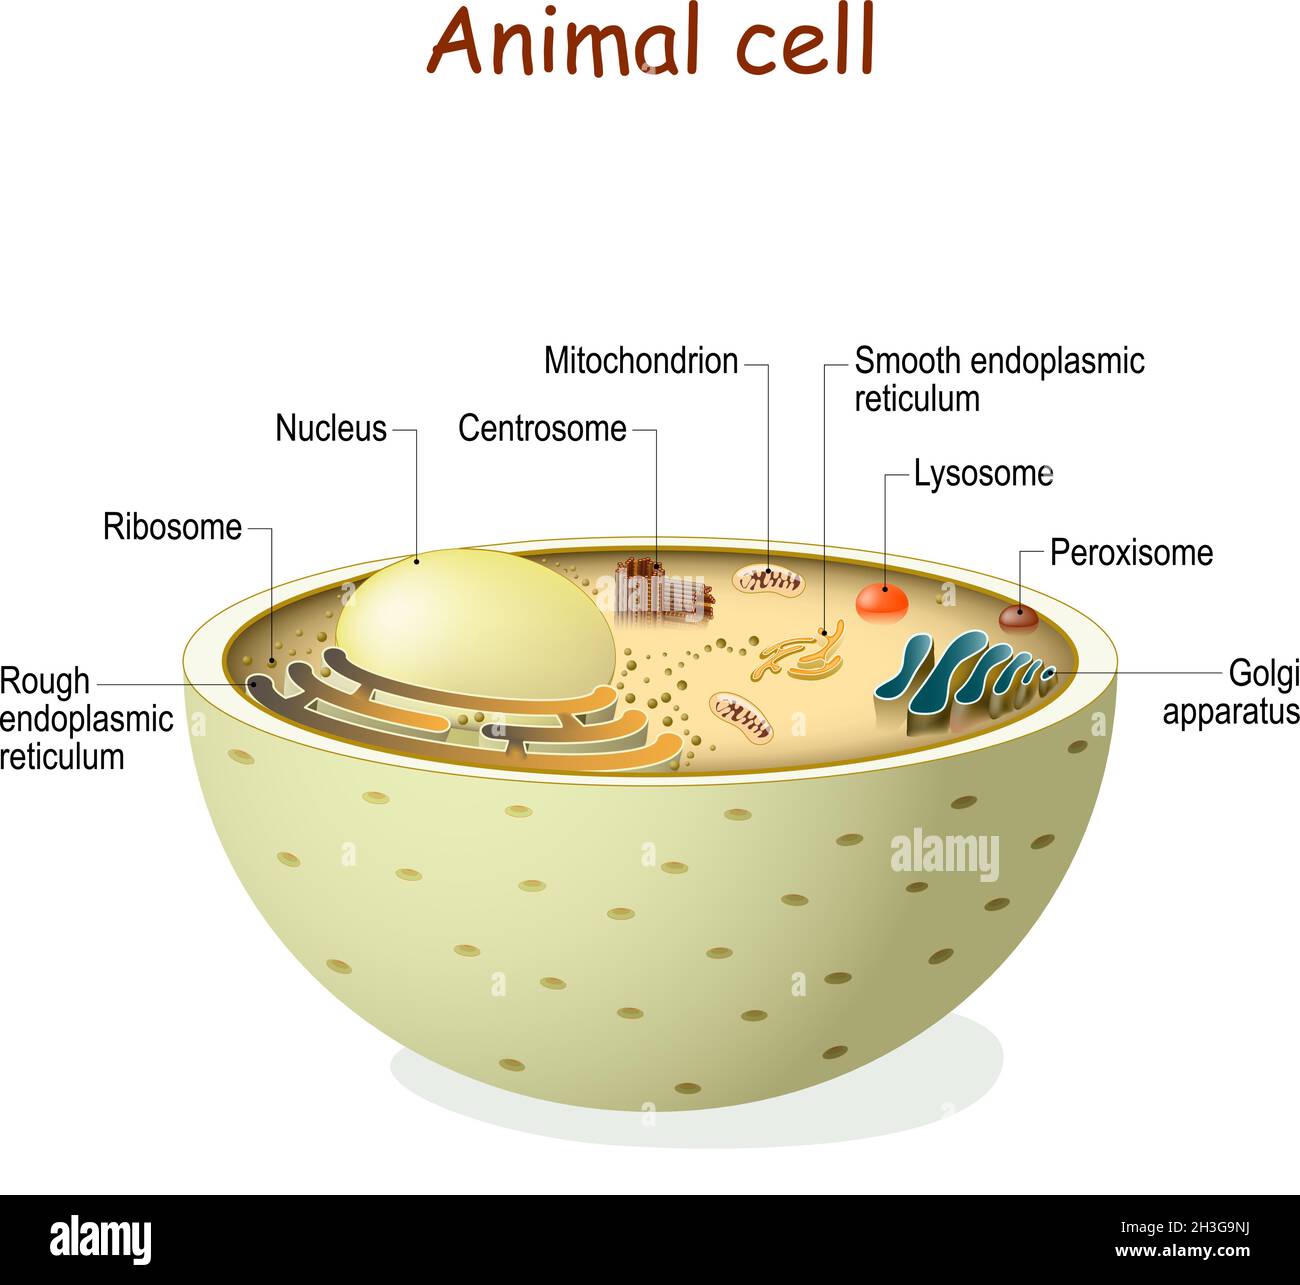 Animal cell anatomy. Organelles and structure of eukaryotic cell. Vector diagram. color can be changed easily Stock Vector